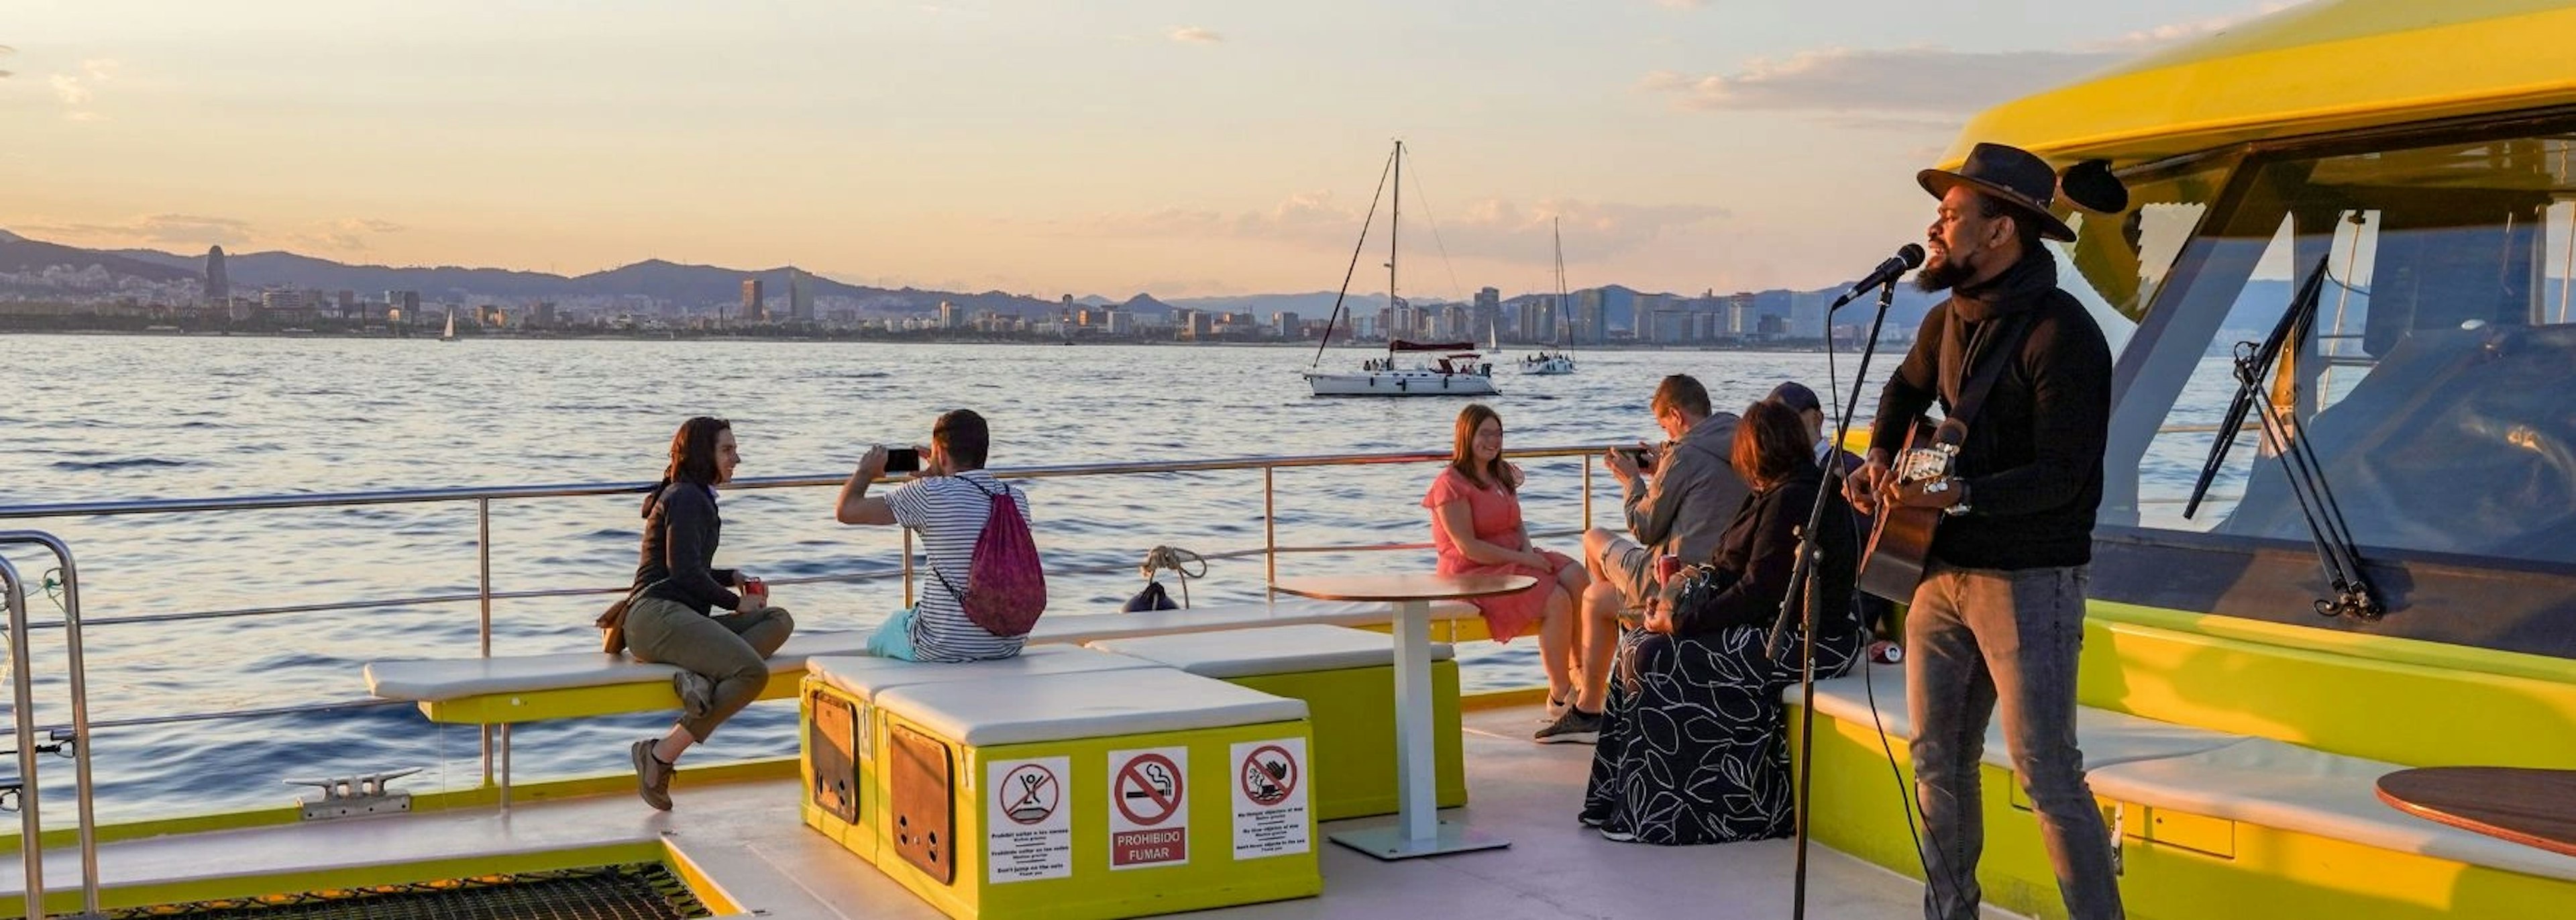 Sail on an eco-friendly design catamaran with sunset and live music option!